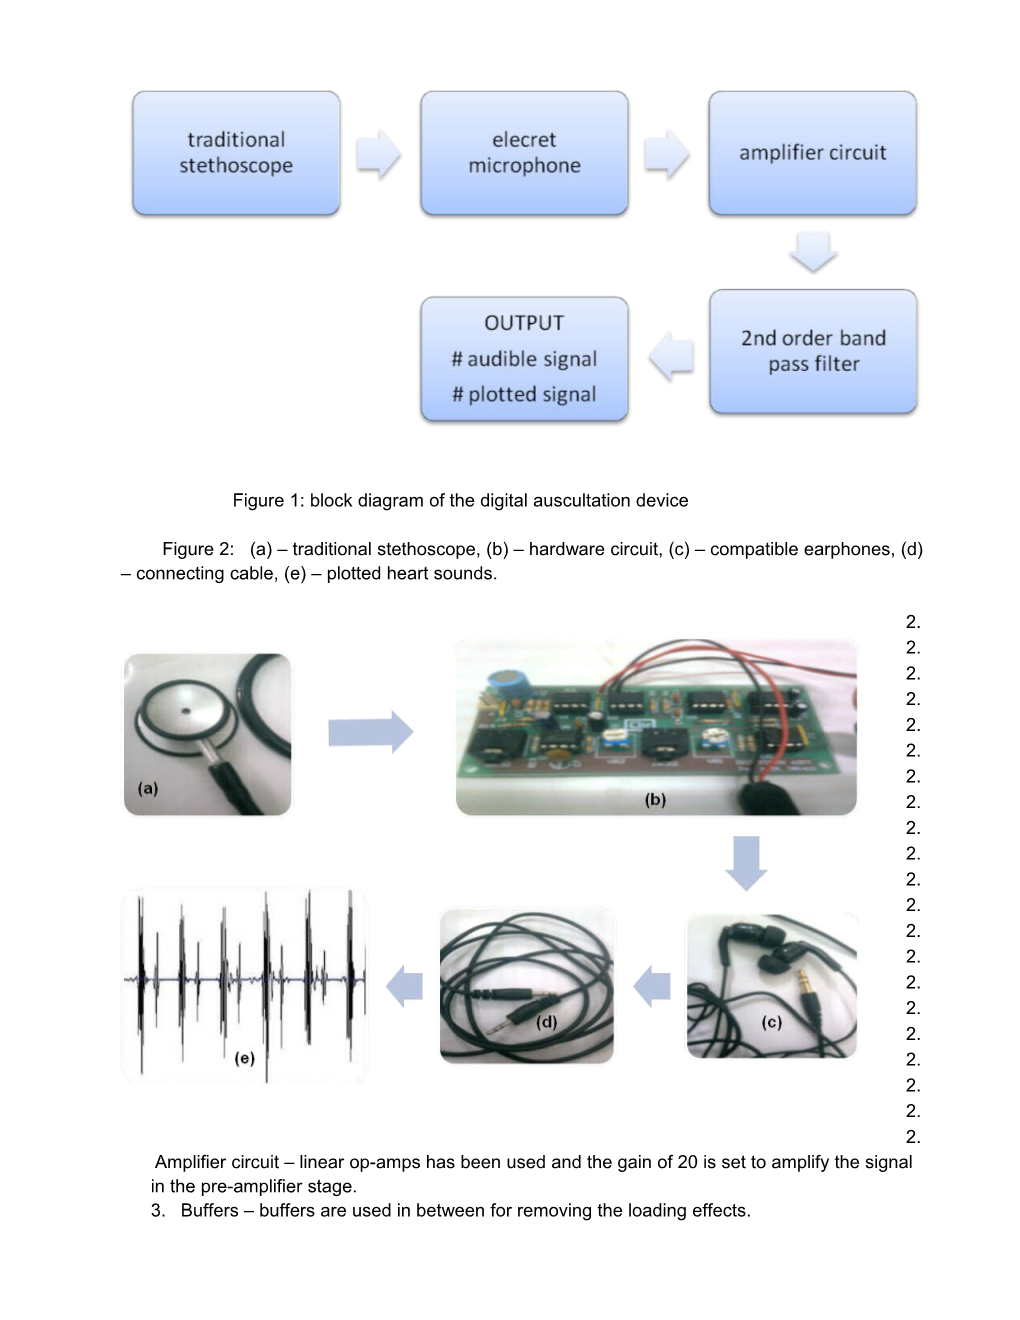 Development of a Digital Auscultation Device for Real Time Murmur Detection